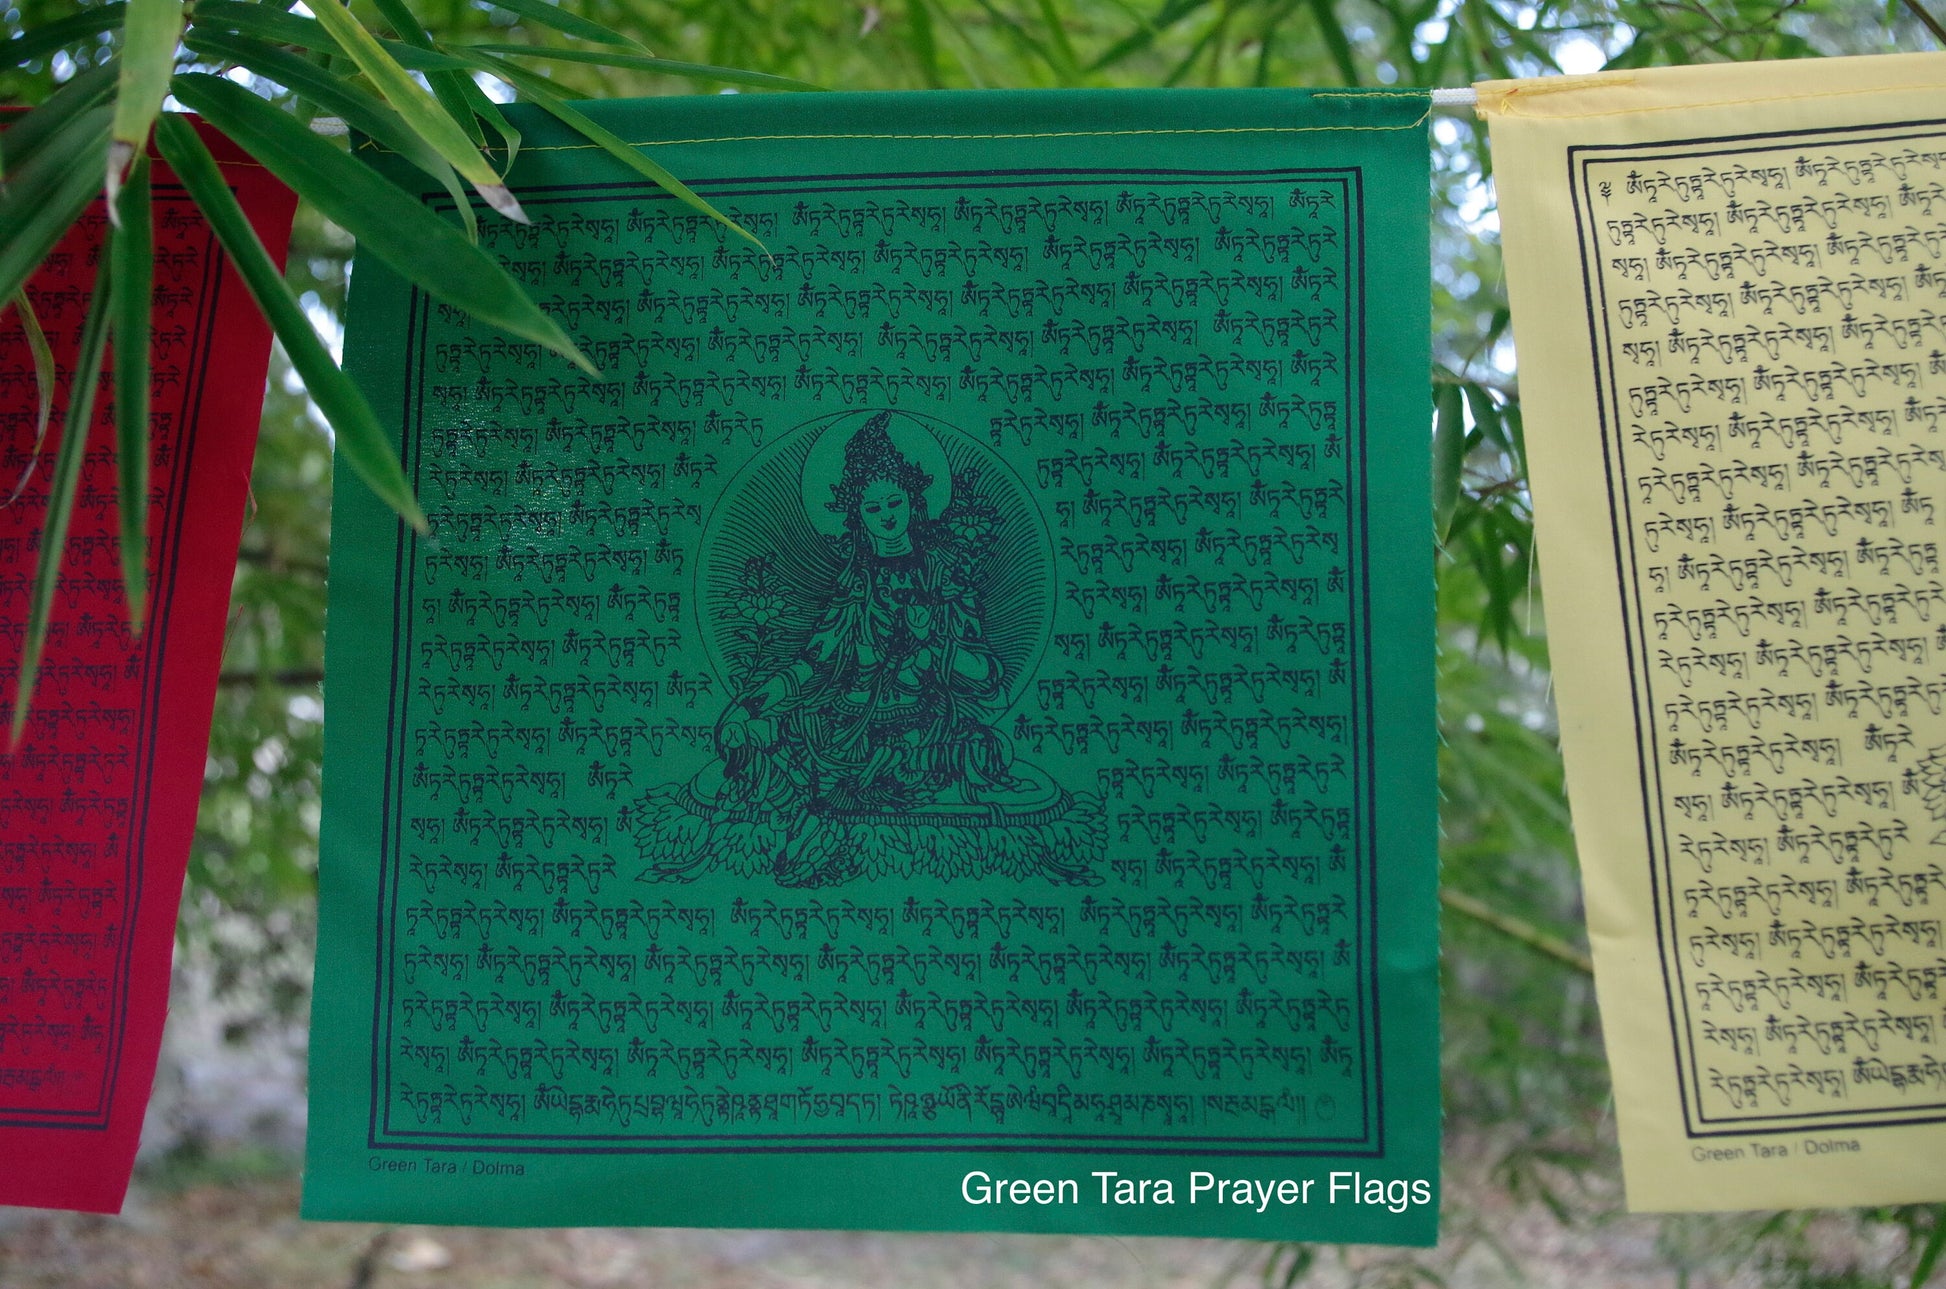 High-quality Green Tara prayer flag from 5-color set of 10, 10x10 in each. Imprinted in black ink with revered image of female Buddha of Compassion.&quot;